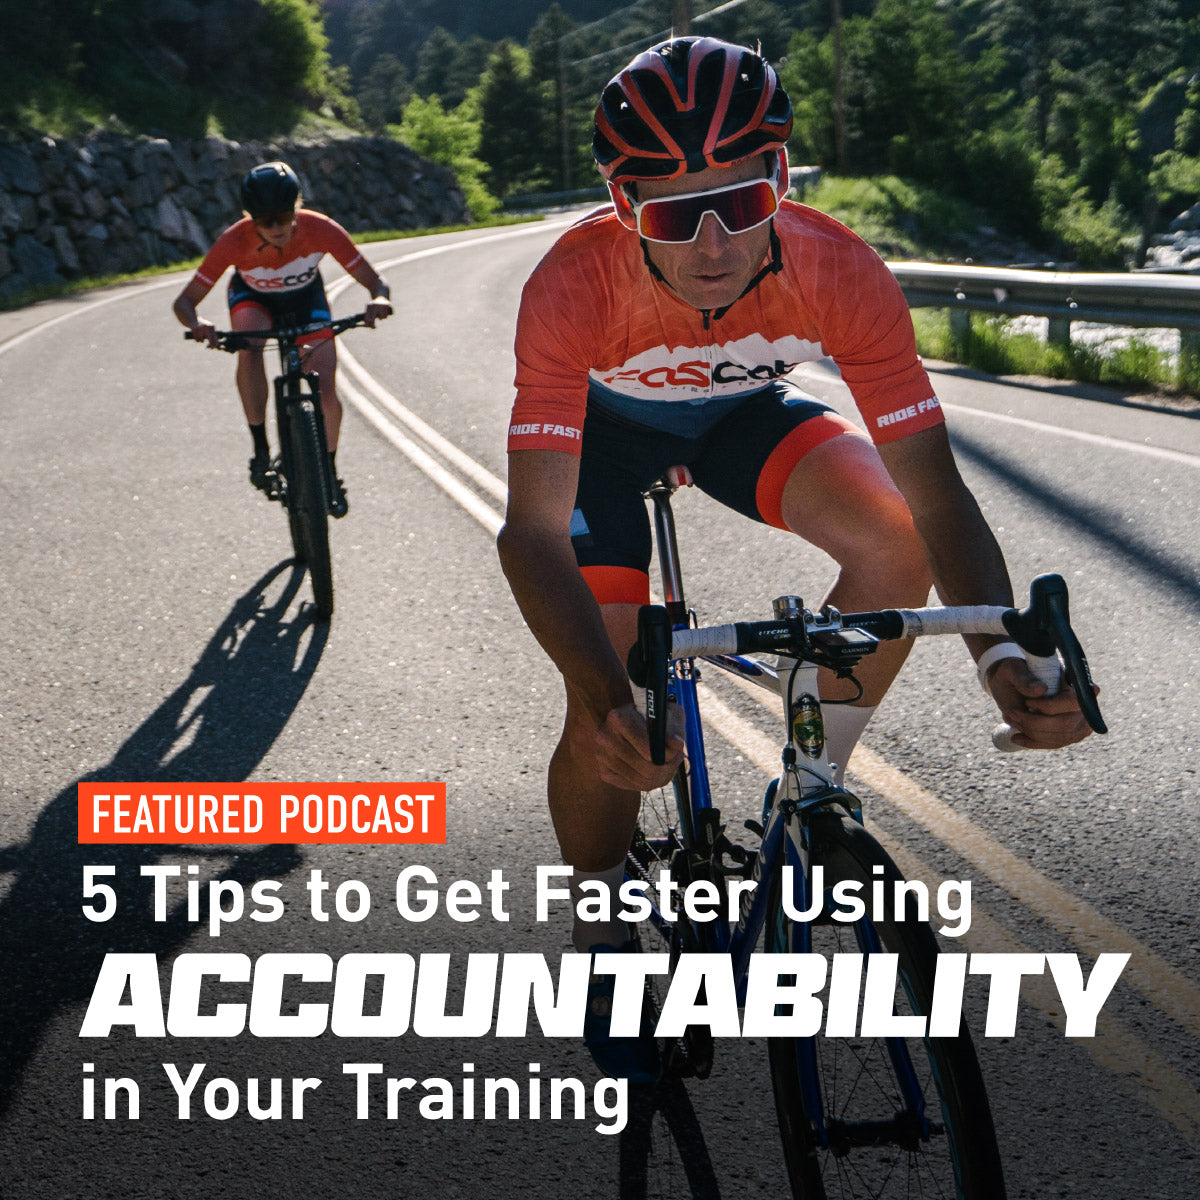 5 Powerful Tips to Get Faster Using Accountability in Your Training